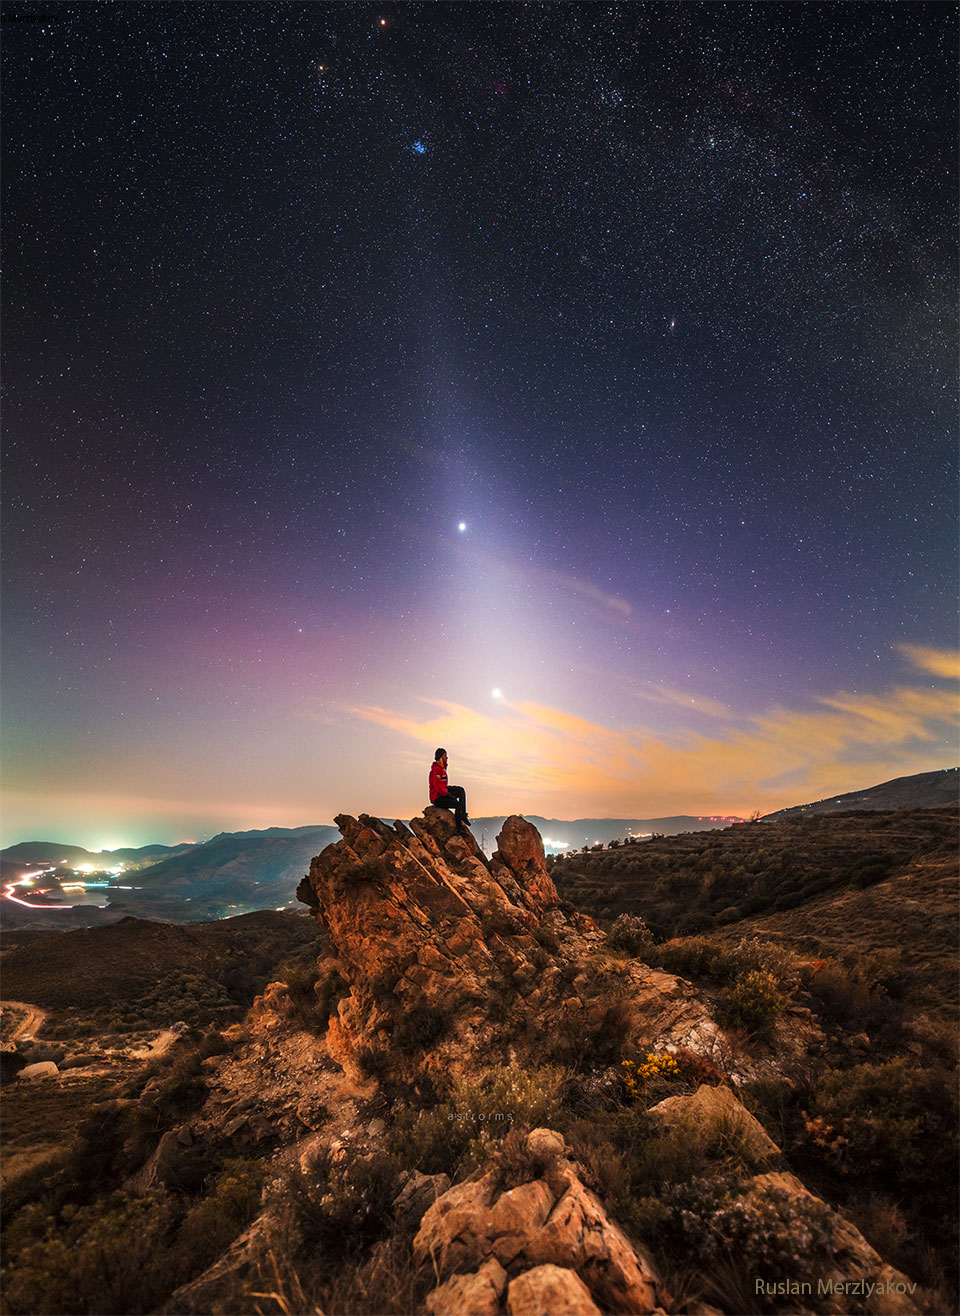 A person is seen sitting on a rock under an unusual sky. In the 
sky above is light diffuse band extending down to the horizon that 
goes through two bright dots, Jupiter and Venus. The Pleiades 
star cluster is visible above them.
Please see the explanation for more detailed information.